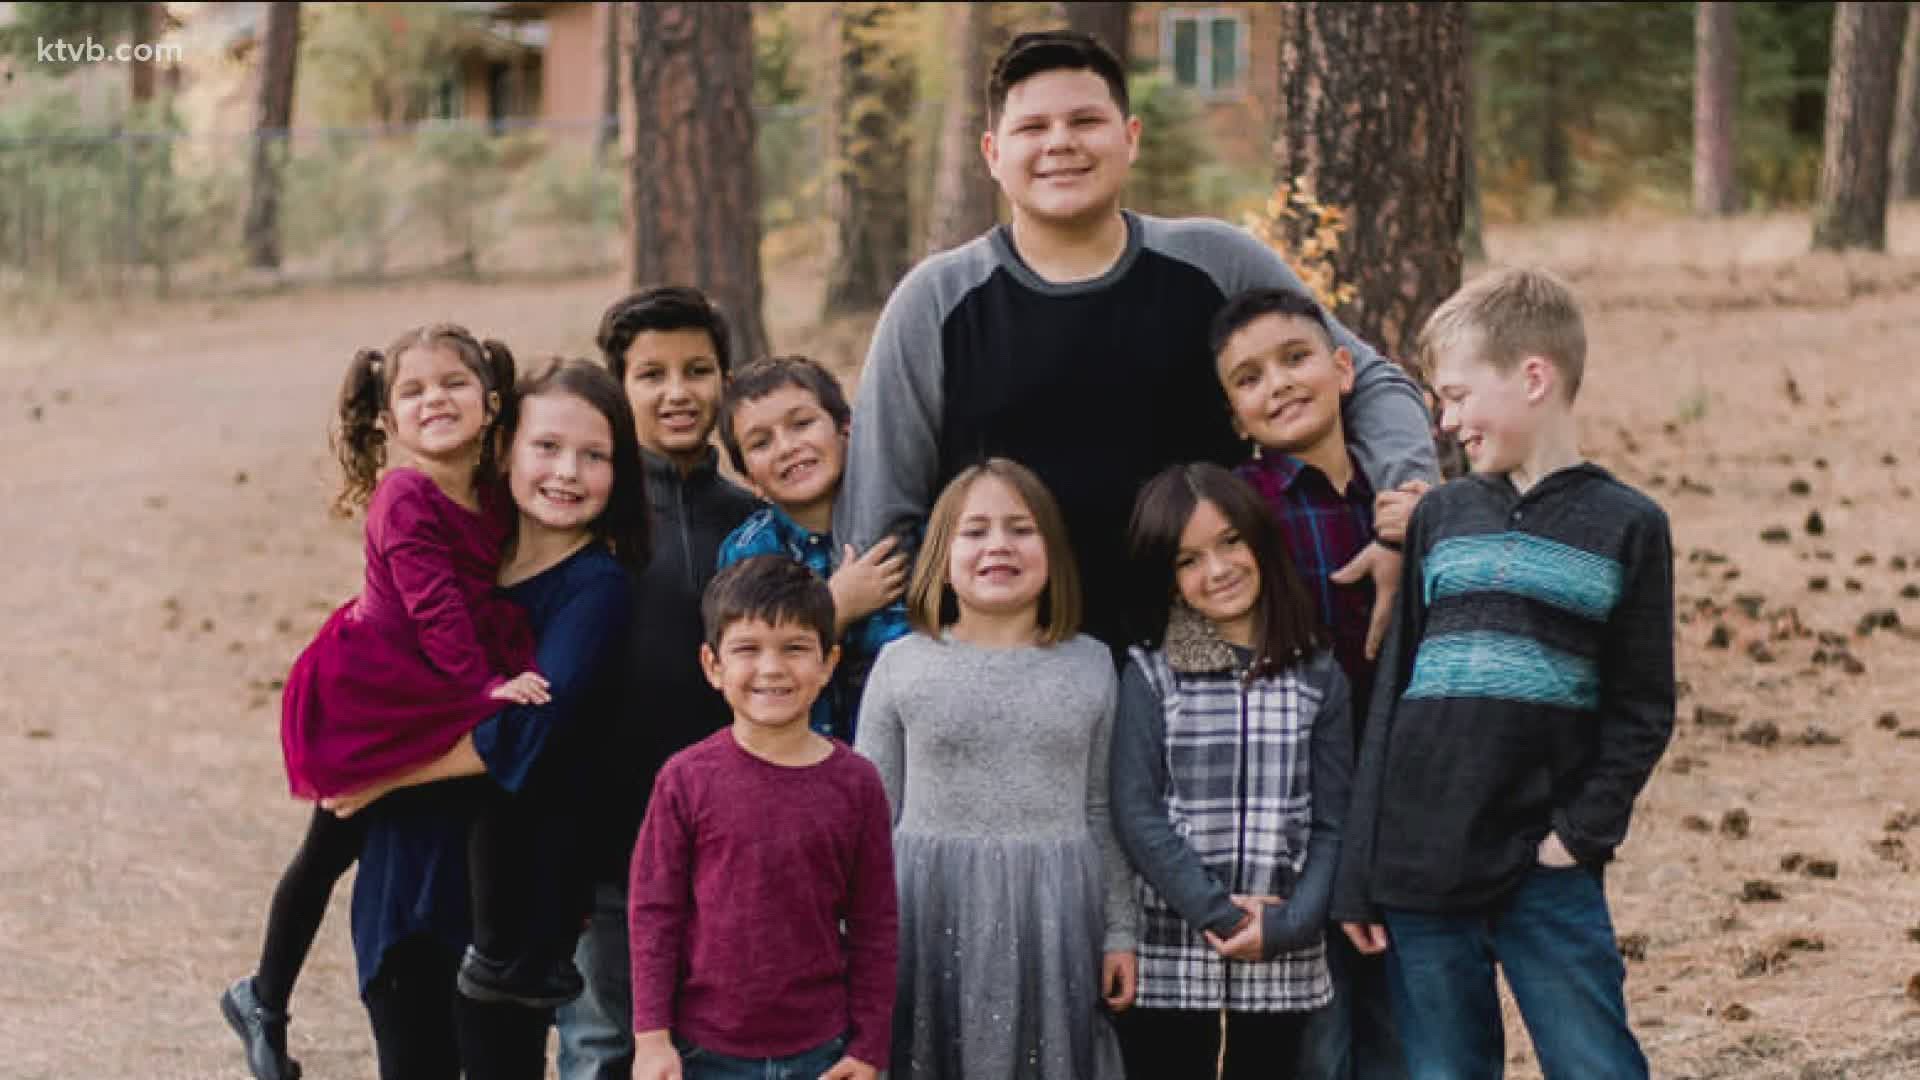 The children were featured on a Wednesday's Child in 2019. Their adoption was just finalized.